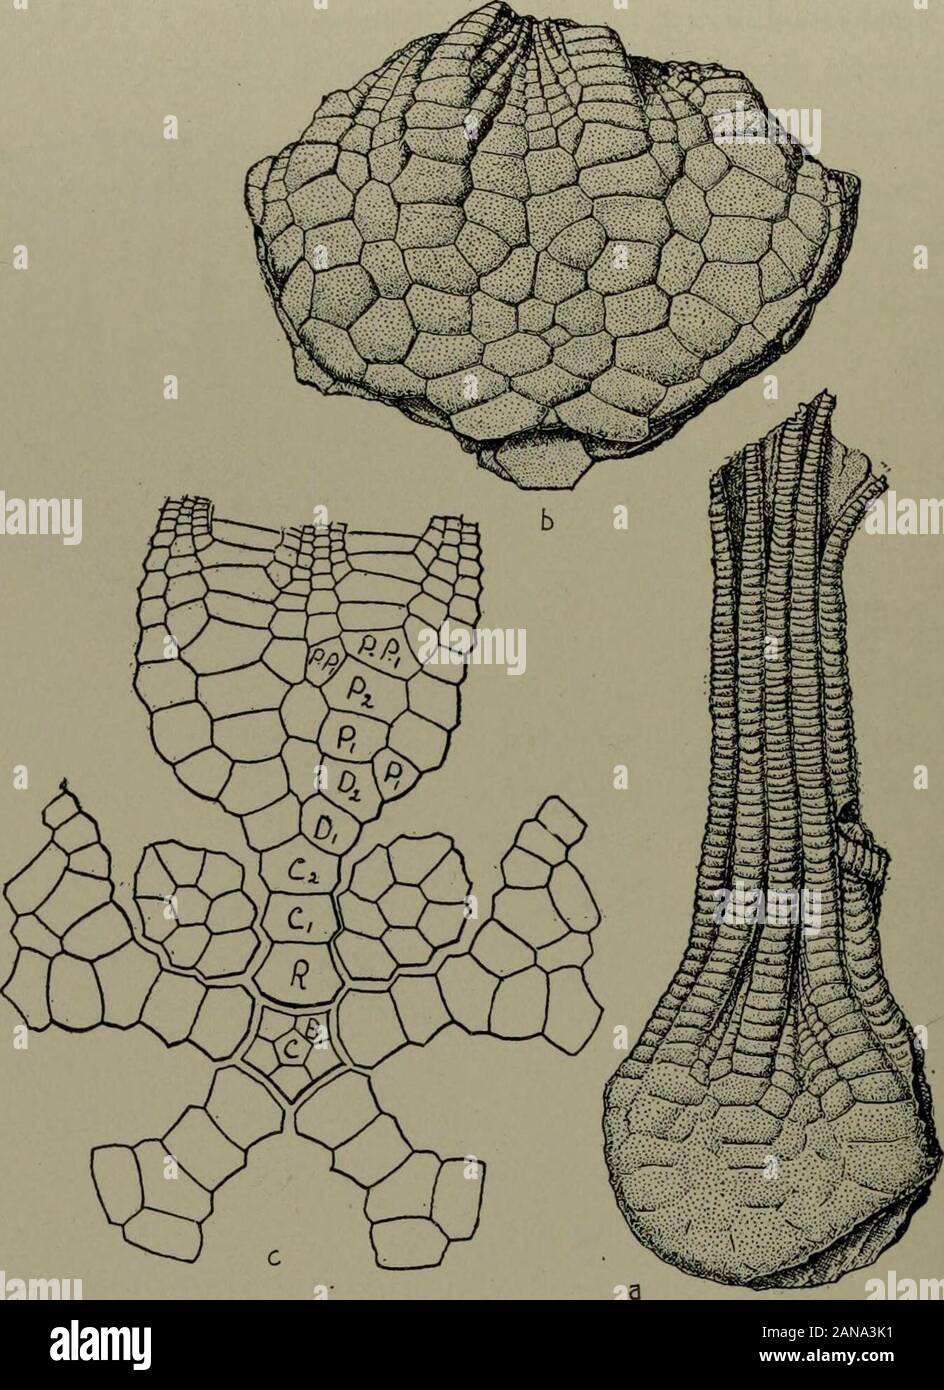 North American index fossils, invertebrates . plankton. Cretacic. 201. U. socialis Grinnell. (Fig. 1907.) Cretacic.Calyx subglobose, composed of numerous, slightly convex plates joined together, with channelled sutures and without distinct sur-face markings. IR, eight or nine in number, forming a rounded,slightly elevated, shield-like area. IB often present.Niobrara of Kansas and Utah. Fig. 1906. Forbesiocrinus worty-eni, a complete calyx with arms, X%. (After Meek and Worthen, 111.Geol., V.) Order V. ARTICULATA Johannes Miiller.LXXVIII. Pentacrinus Miller.Calyx small, bowl-shaped, with dicycl Stock Photo